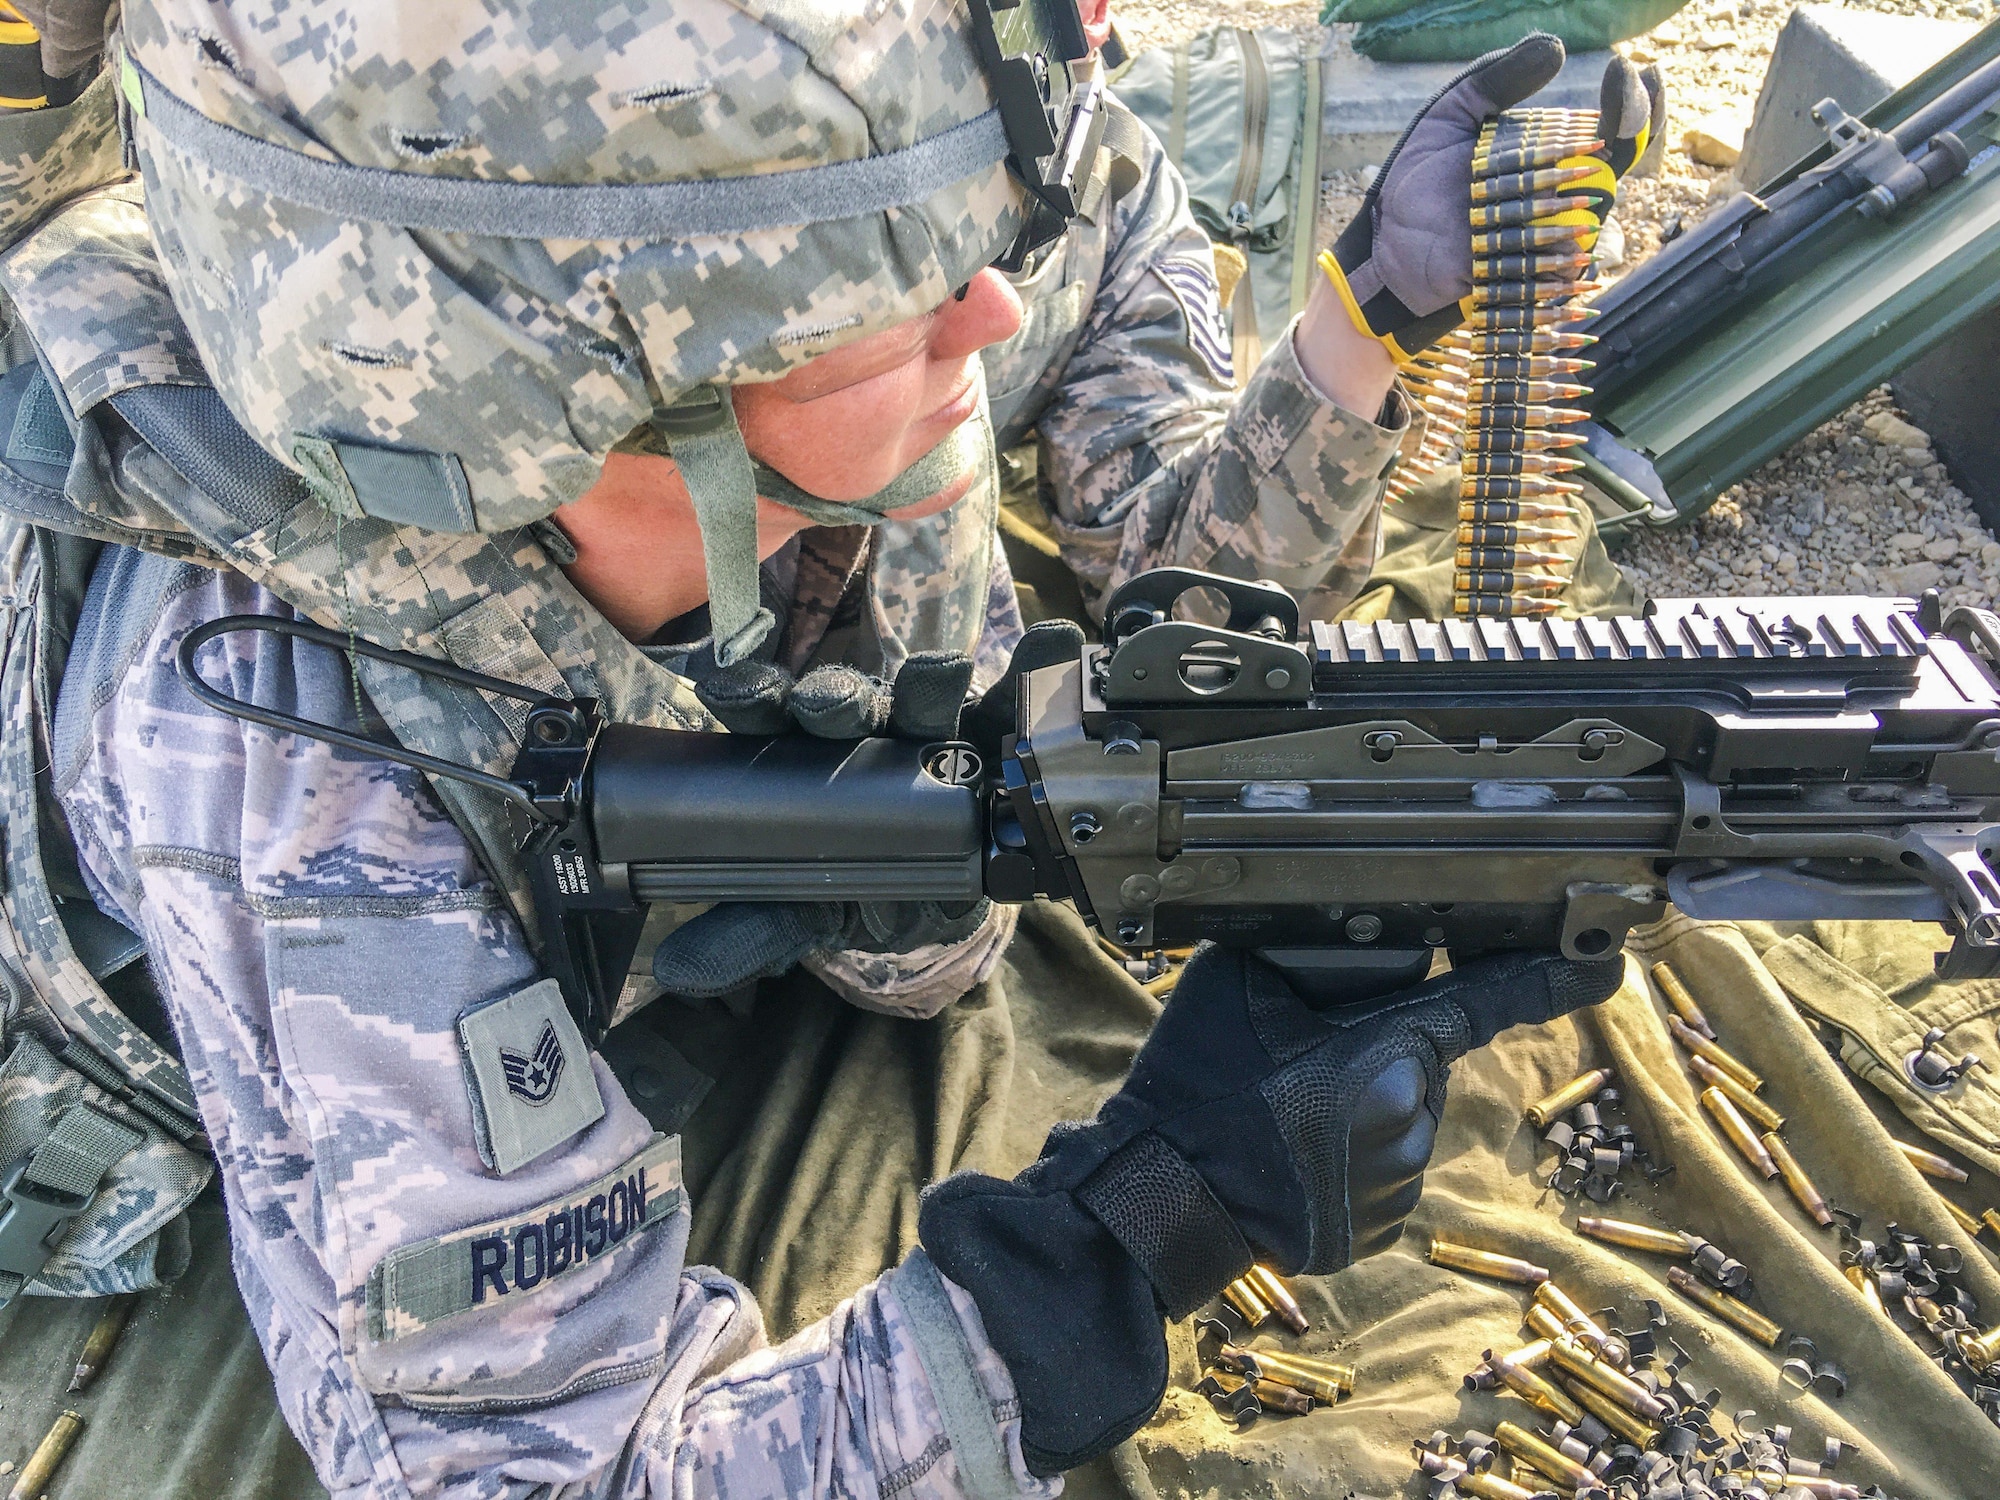 U.S. Staff Sgt. Amber Robison, with the 139th Security Forces Squadron, Missouri Air National Guard, prepares to fire a M249 light machine gun, during a live-fire training exercise at Fort Riley, Kan., June 7, 2017. The live-fire machine gun training is an annual requirement for members of security forces and support personnel. (U.S. Air National Guard photo by Staff Sgt. Troy Green)